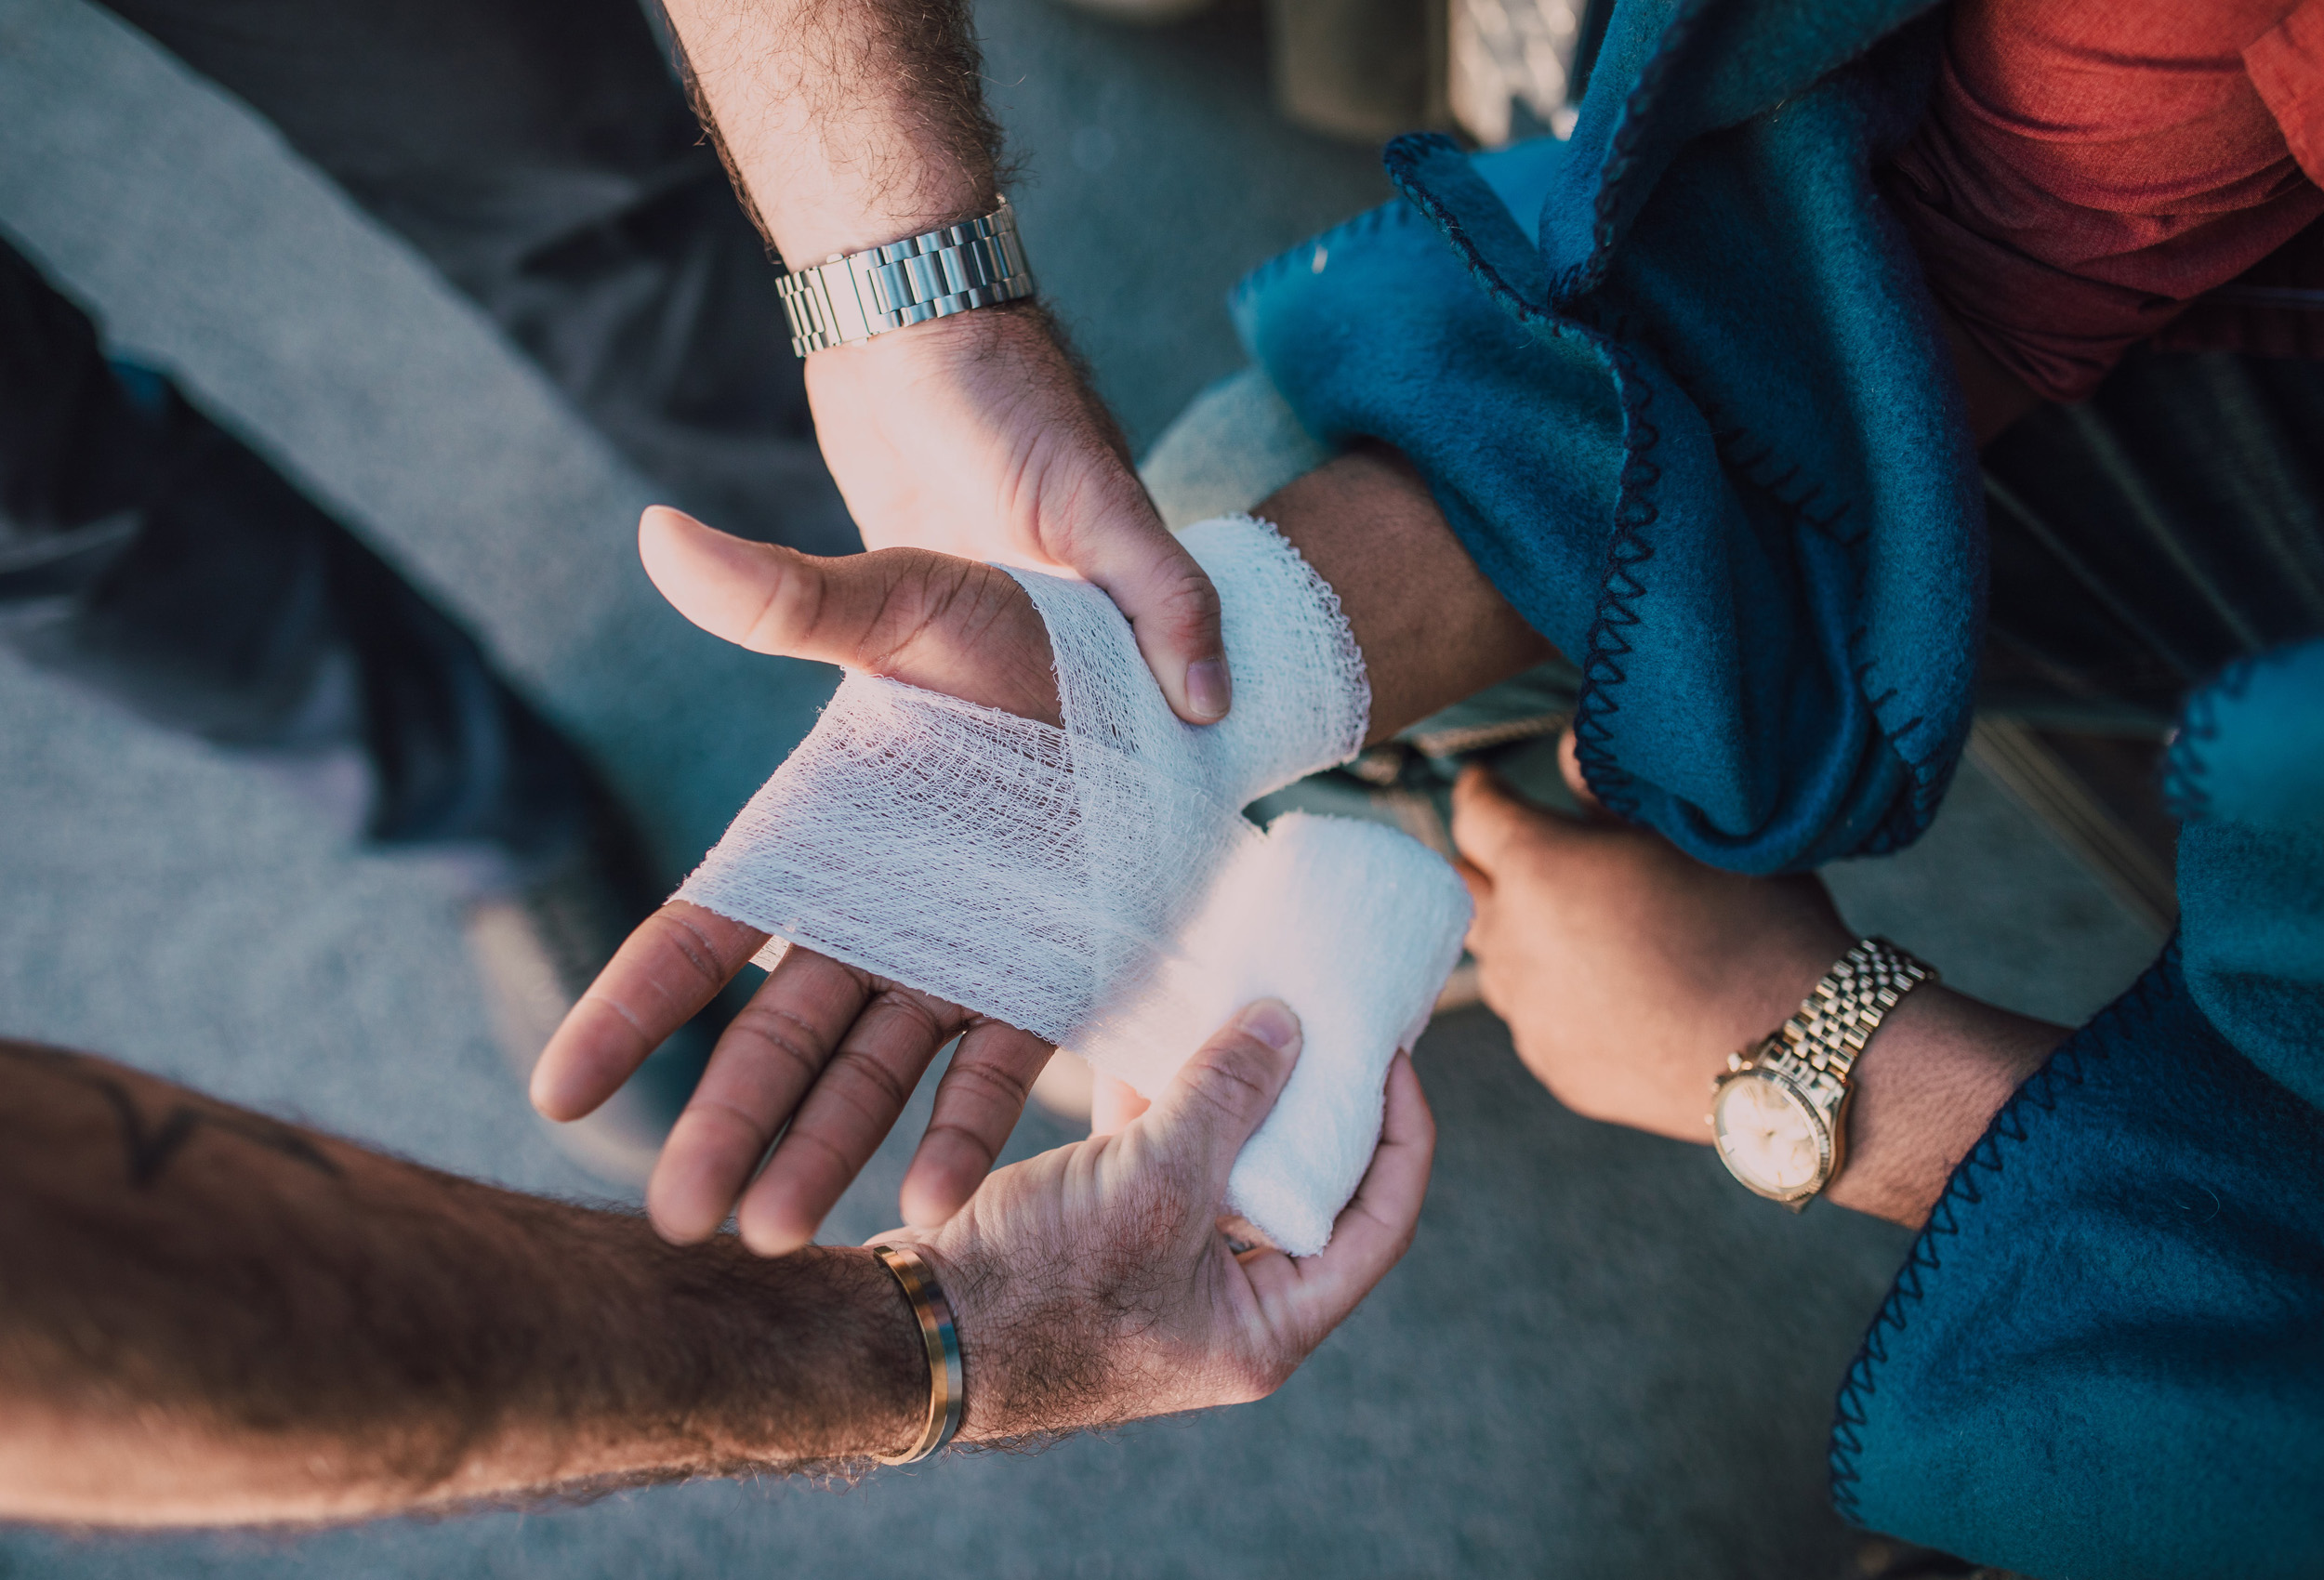 Discovering the Significance of Acquiring First Aid Knowledge: 5 Compelling Motives to Pursue